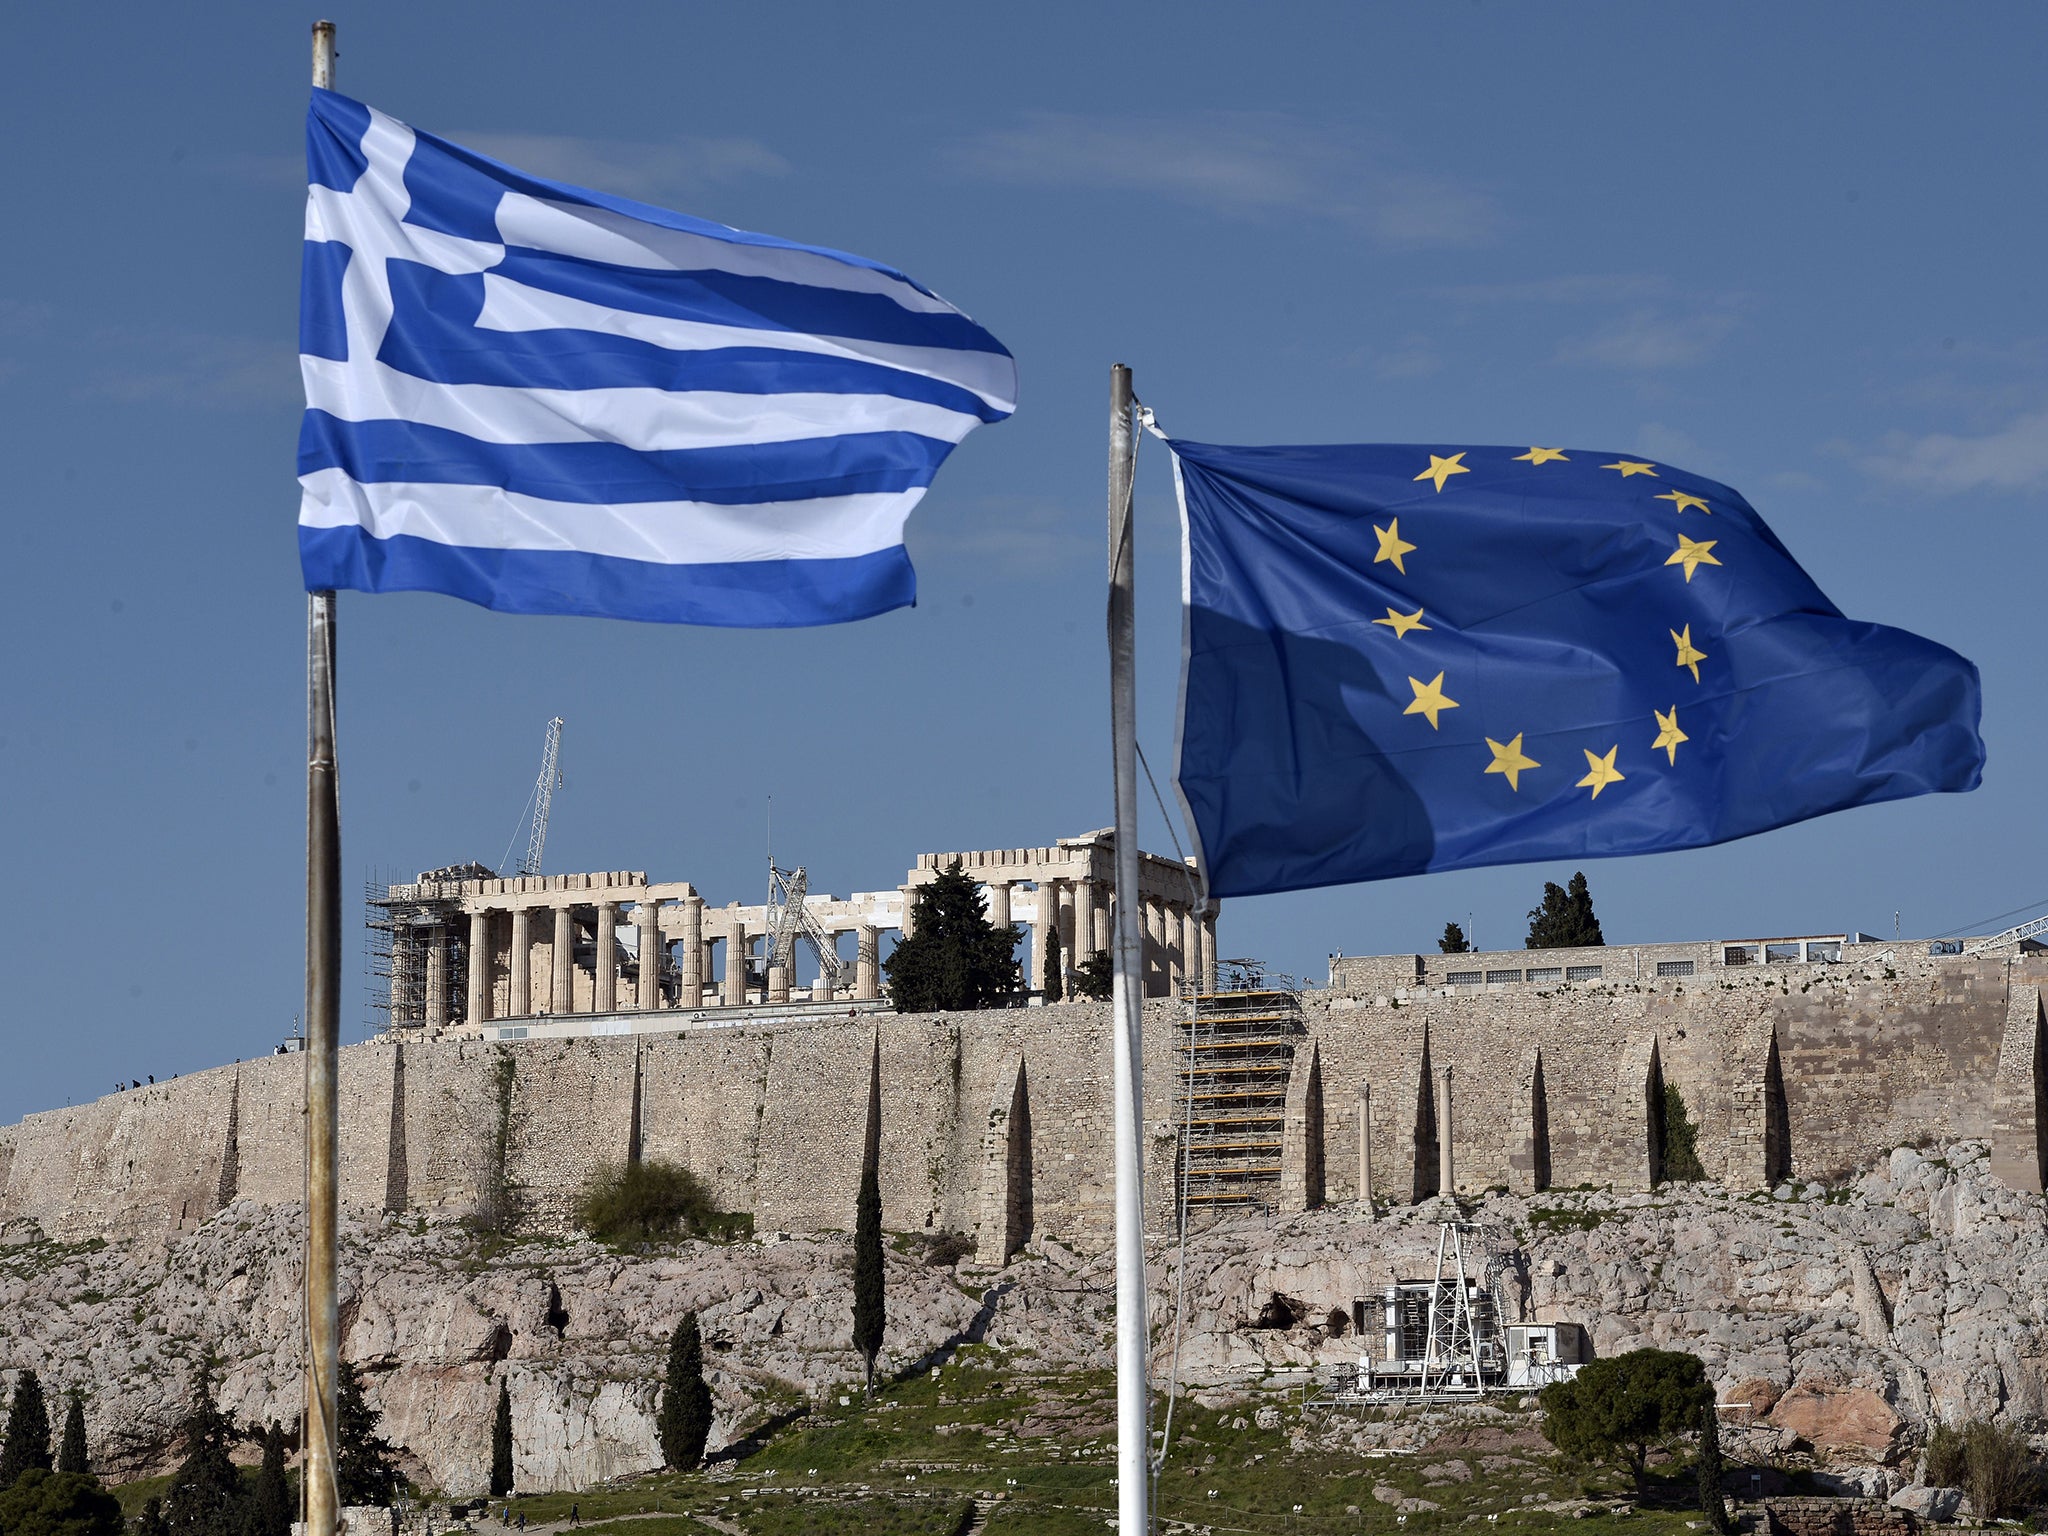 Athens is attempting to negotiate a better deal with its creditor nations in the European Union